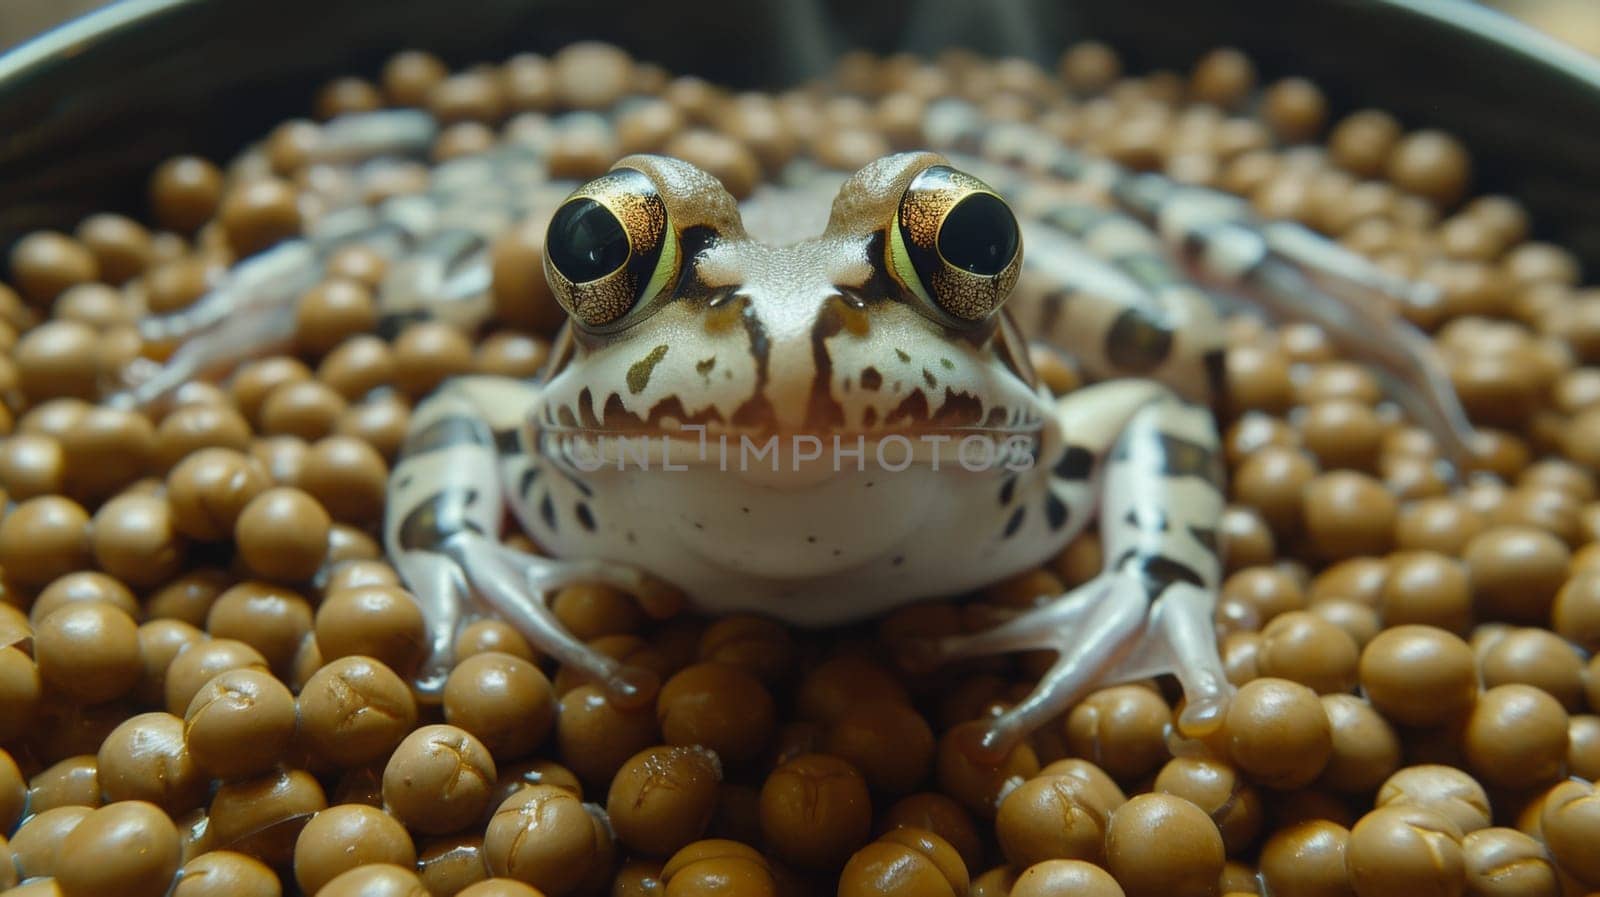 A frog sitting in a bowl of beans with its eyes open